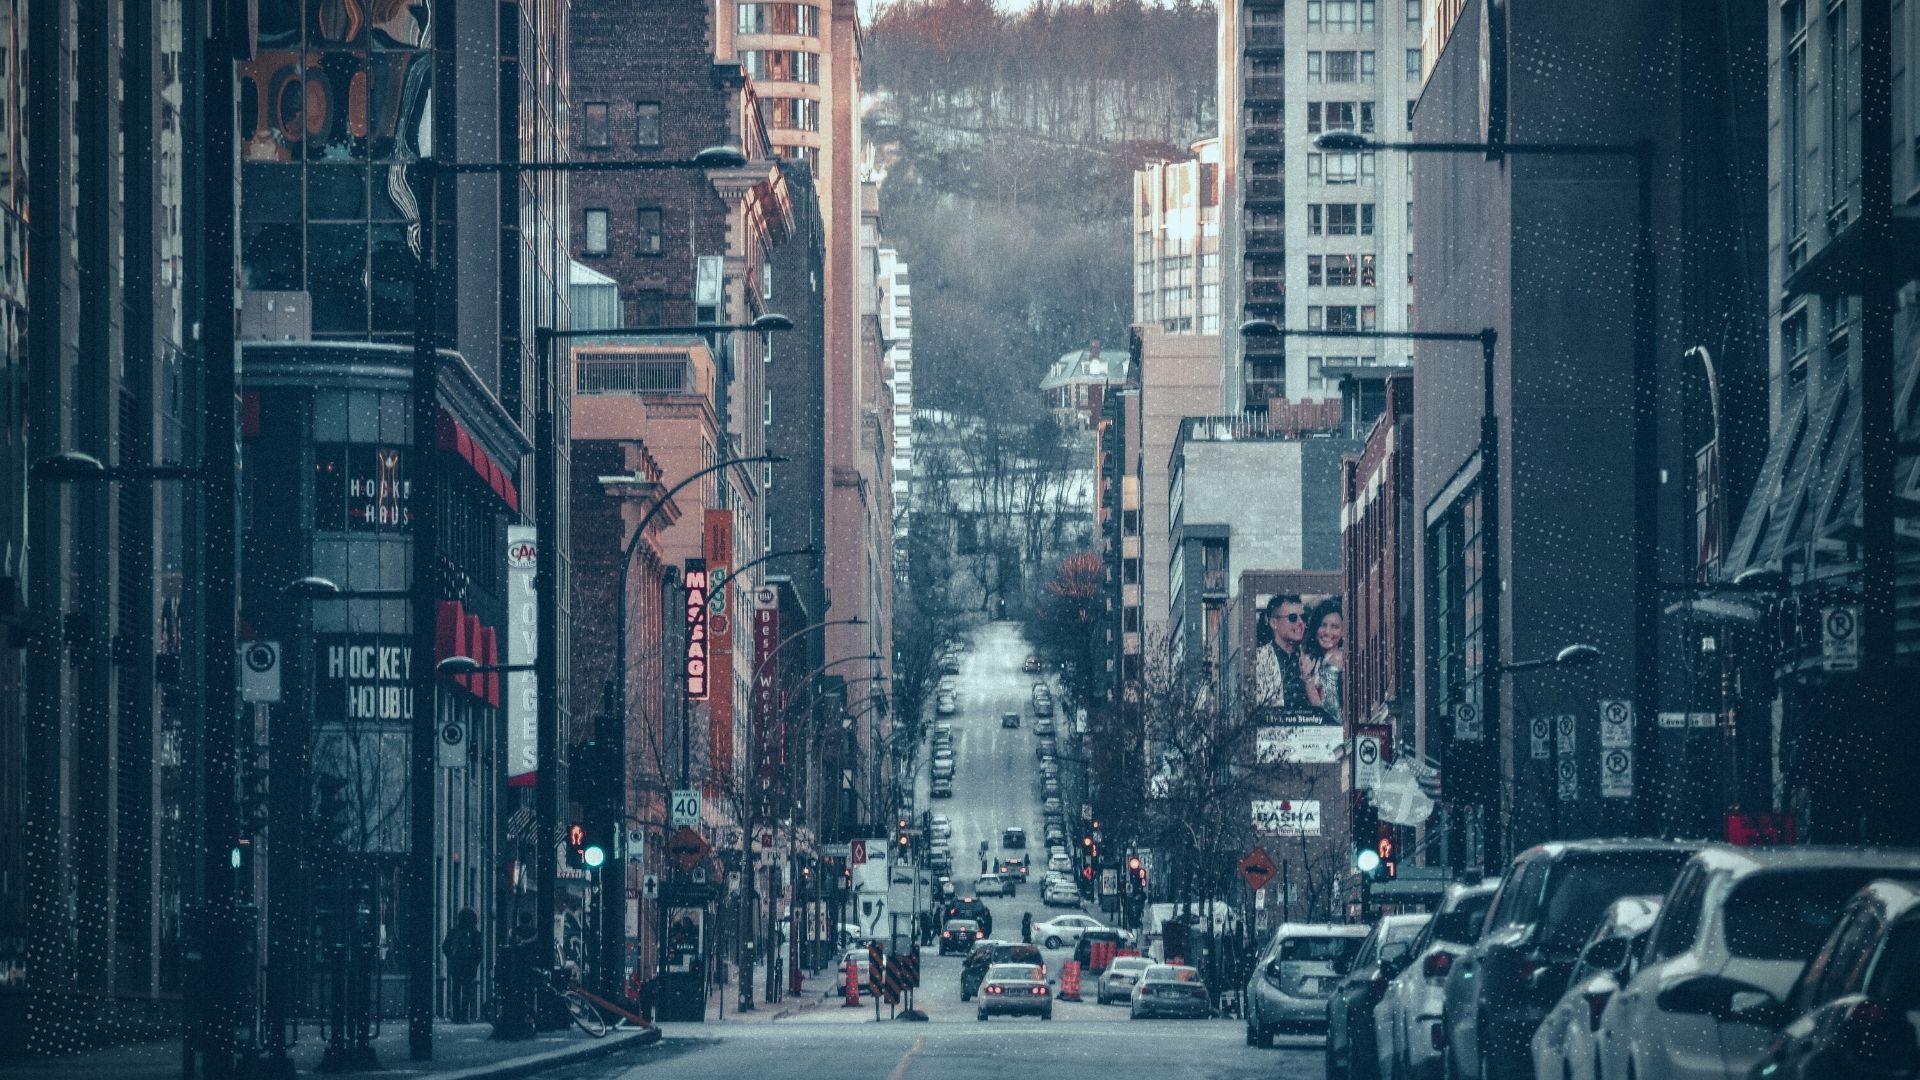 view of the street and buildings in montreal